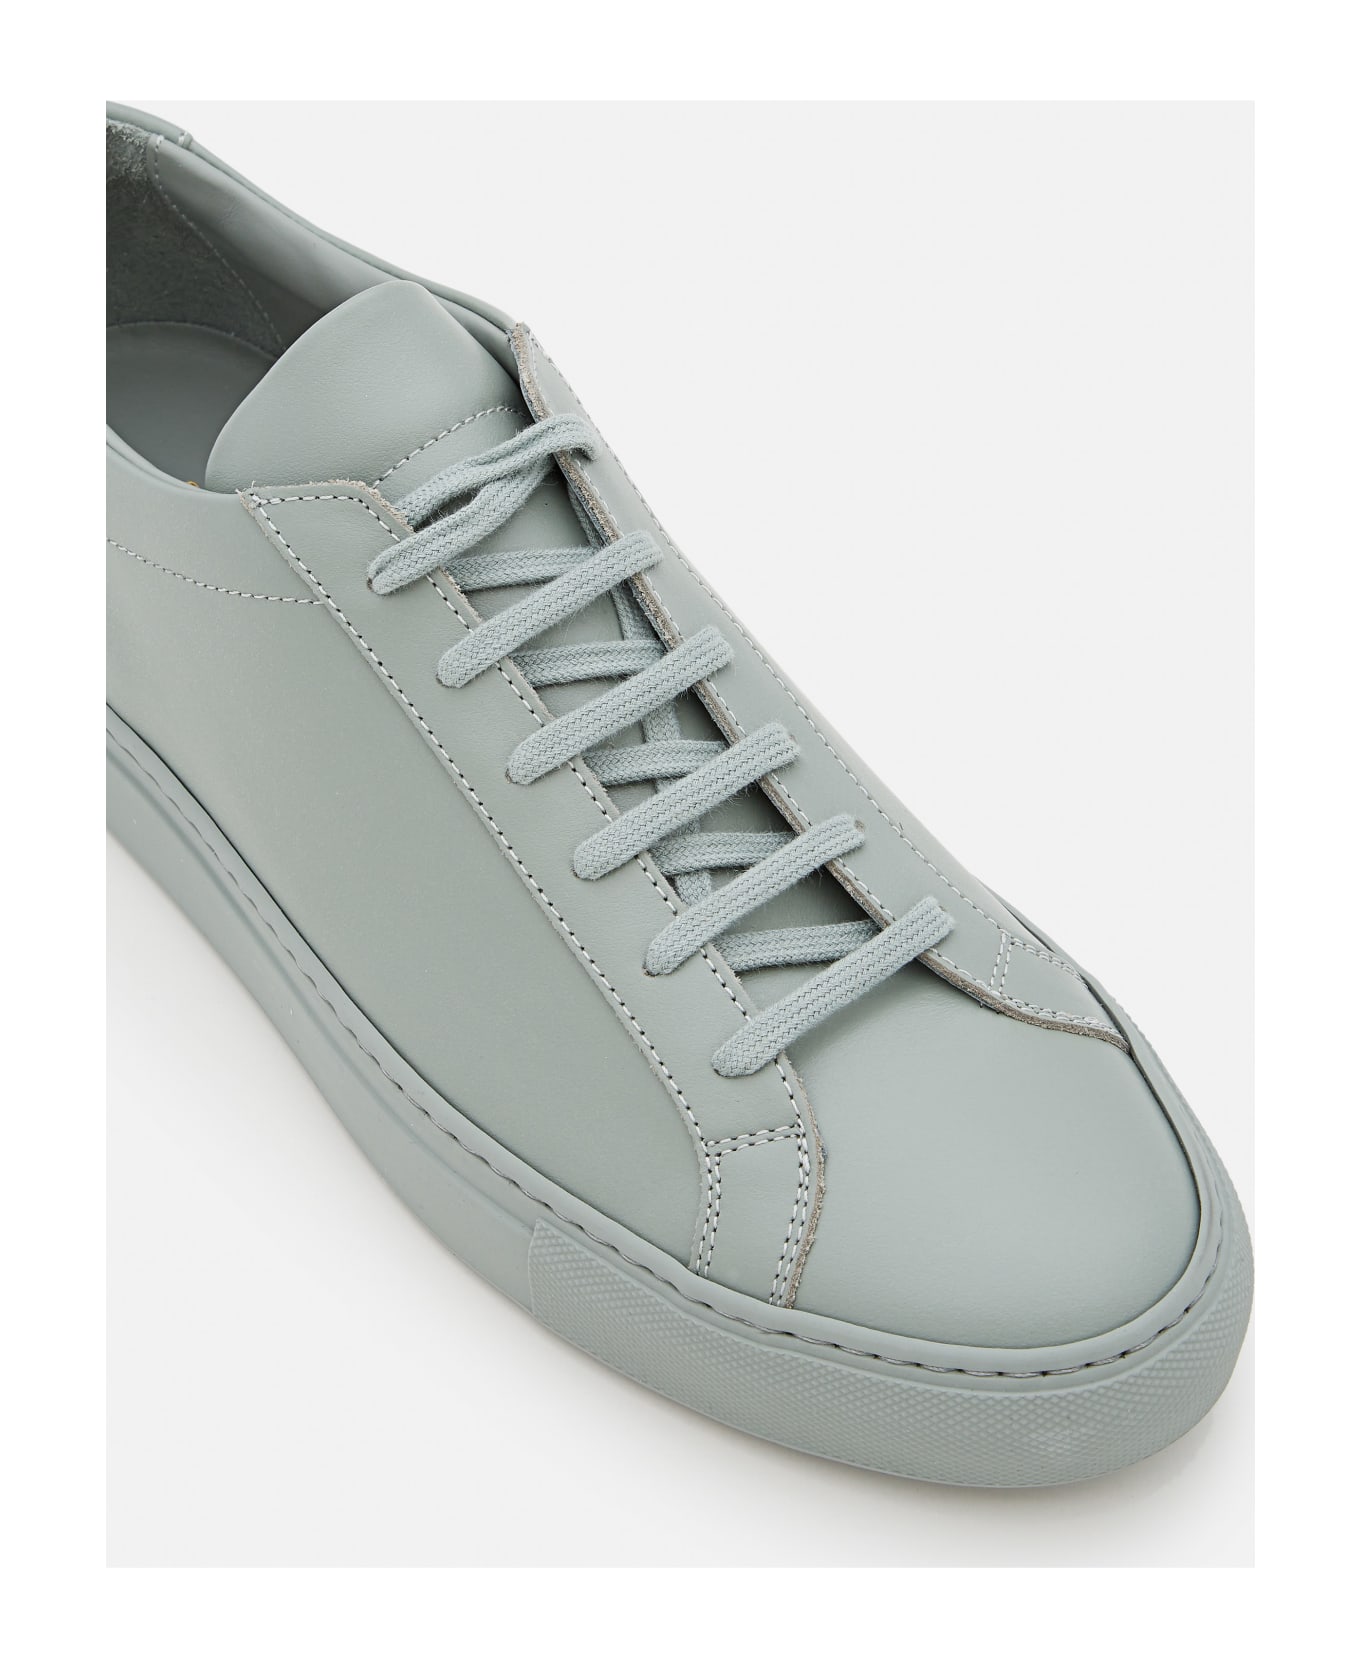 Common Projects Original Achilles Low Sneakers - Green